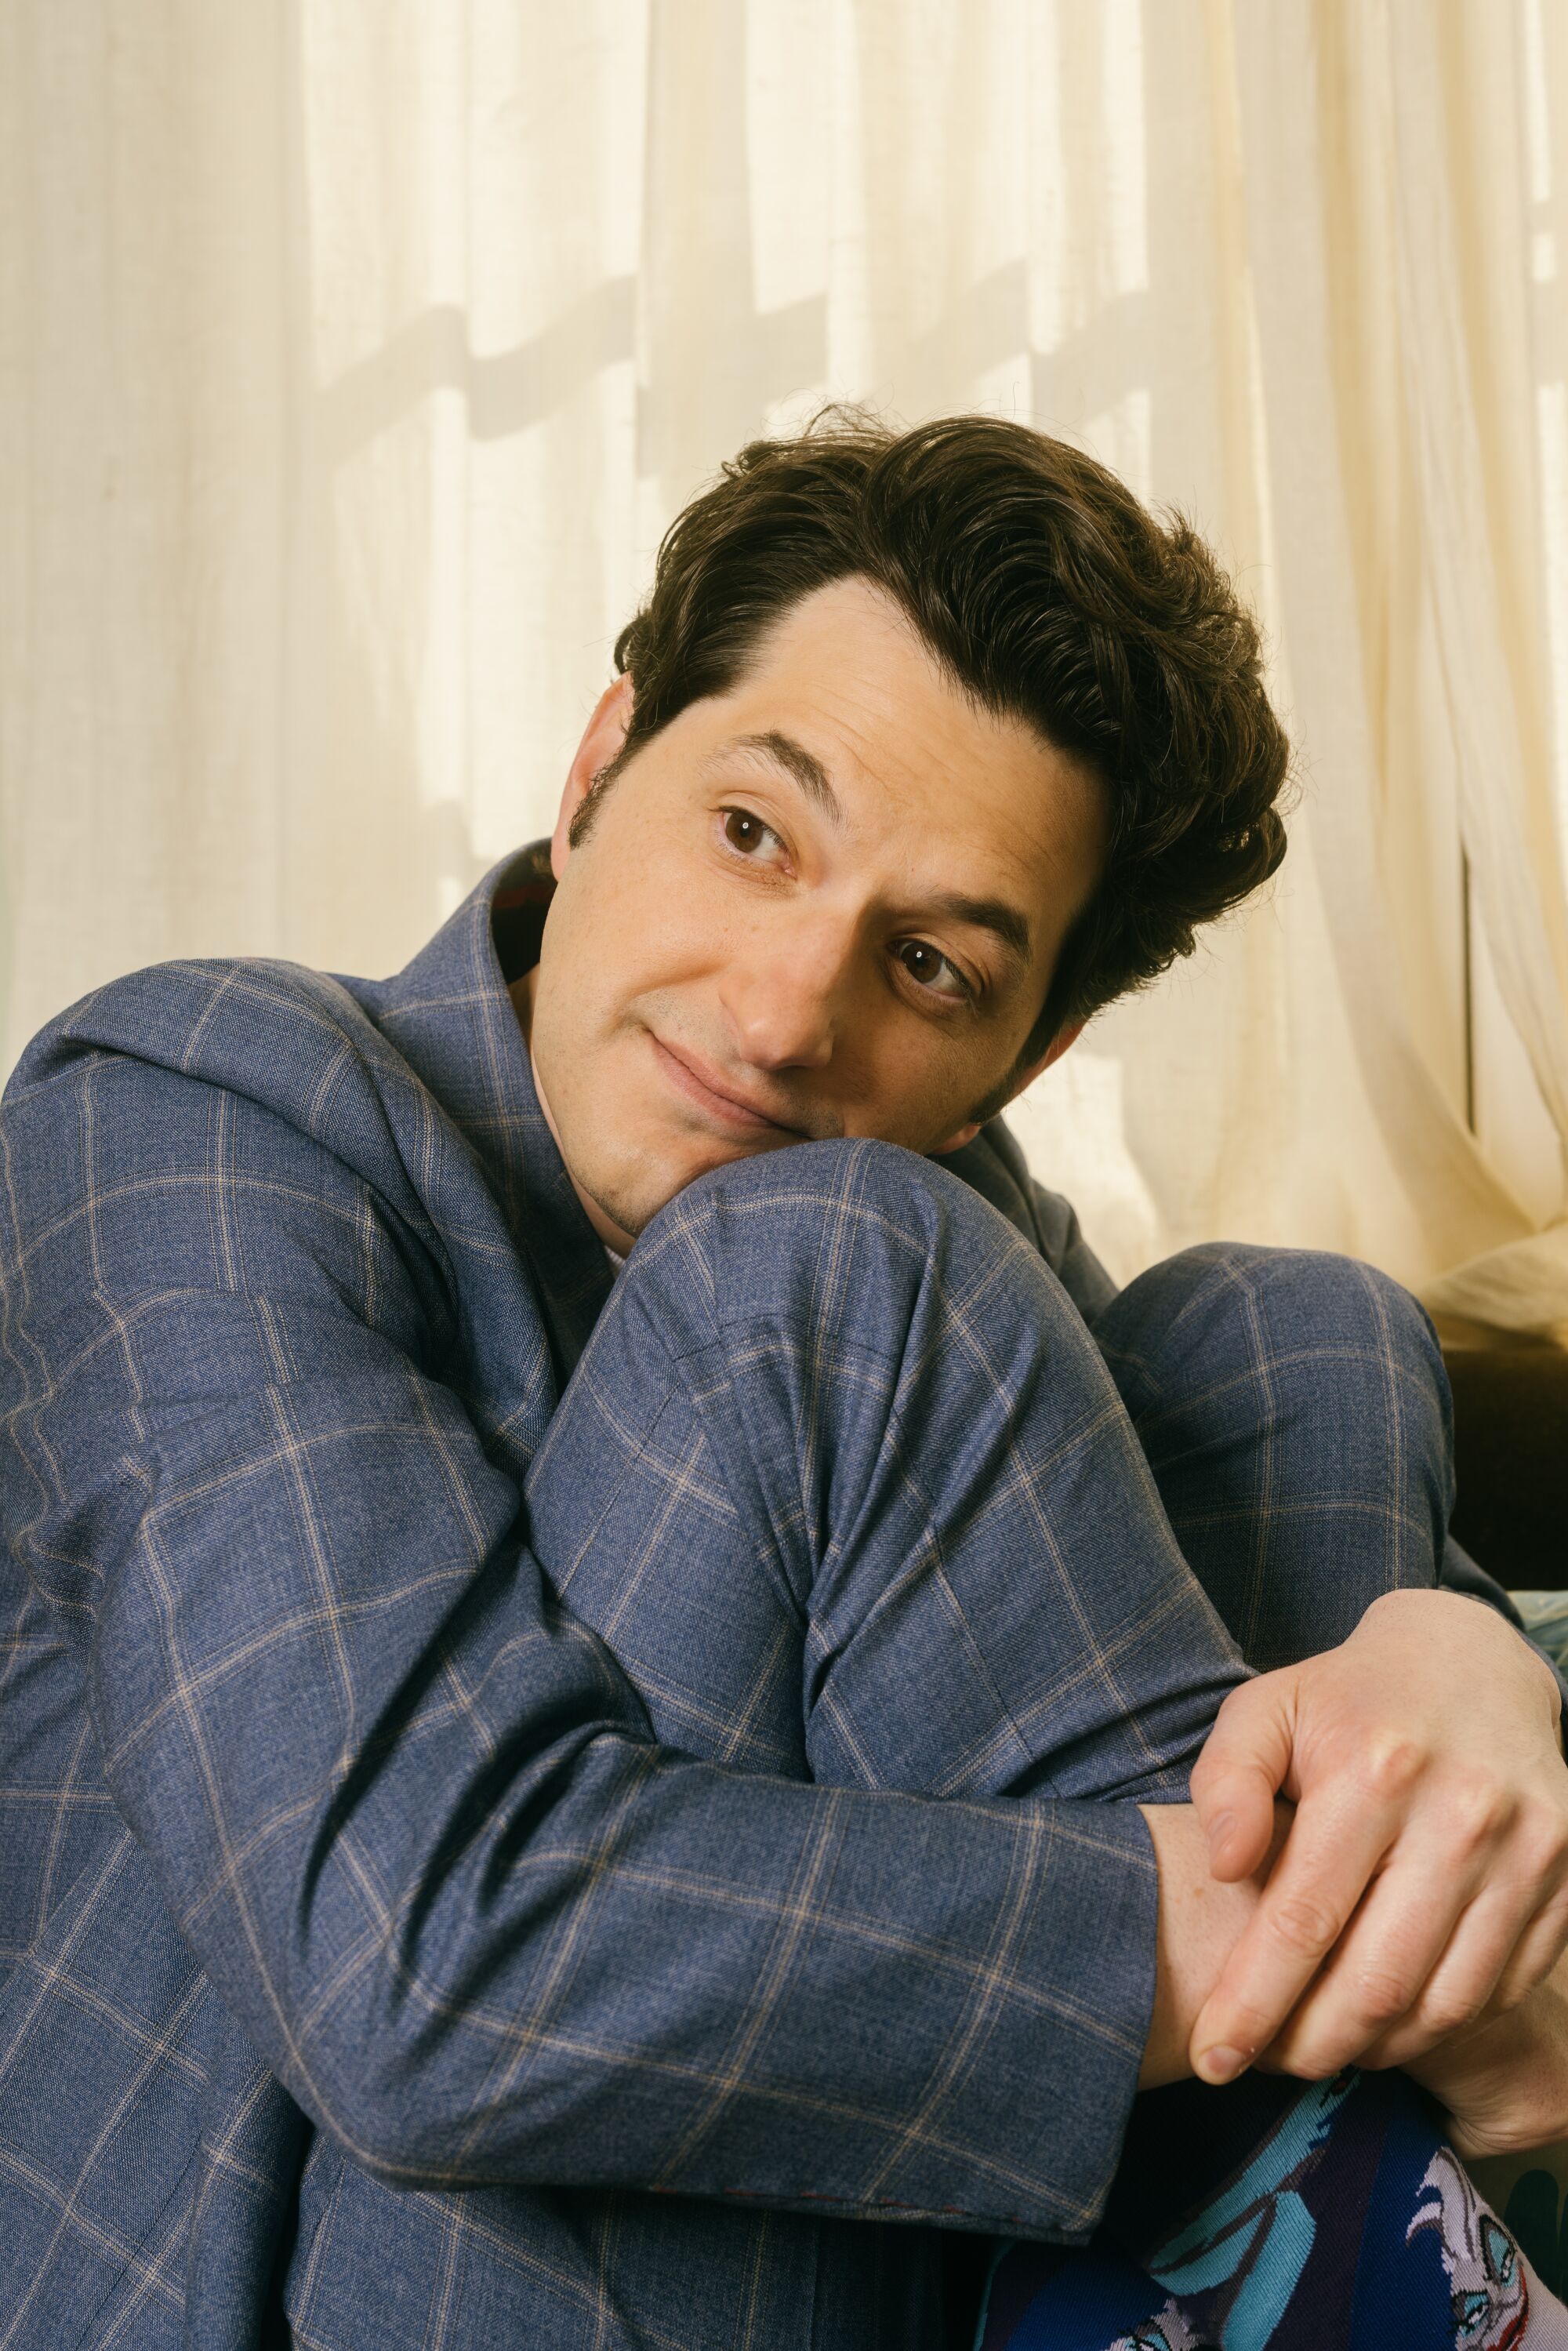 Ben Schwartz photographed at a private residence. Schwartz co-stars in "The Afterparty" a comedic murder mystery series. 